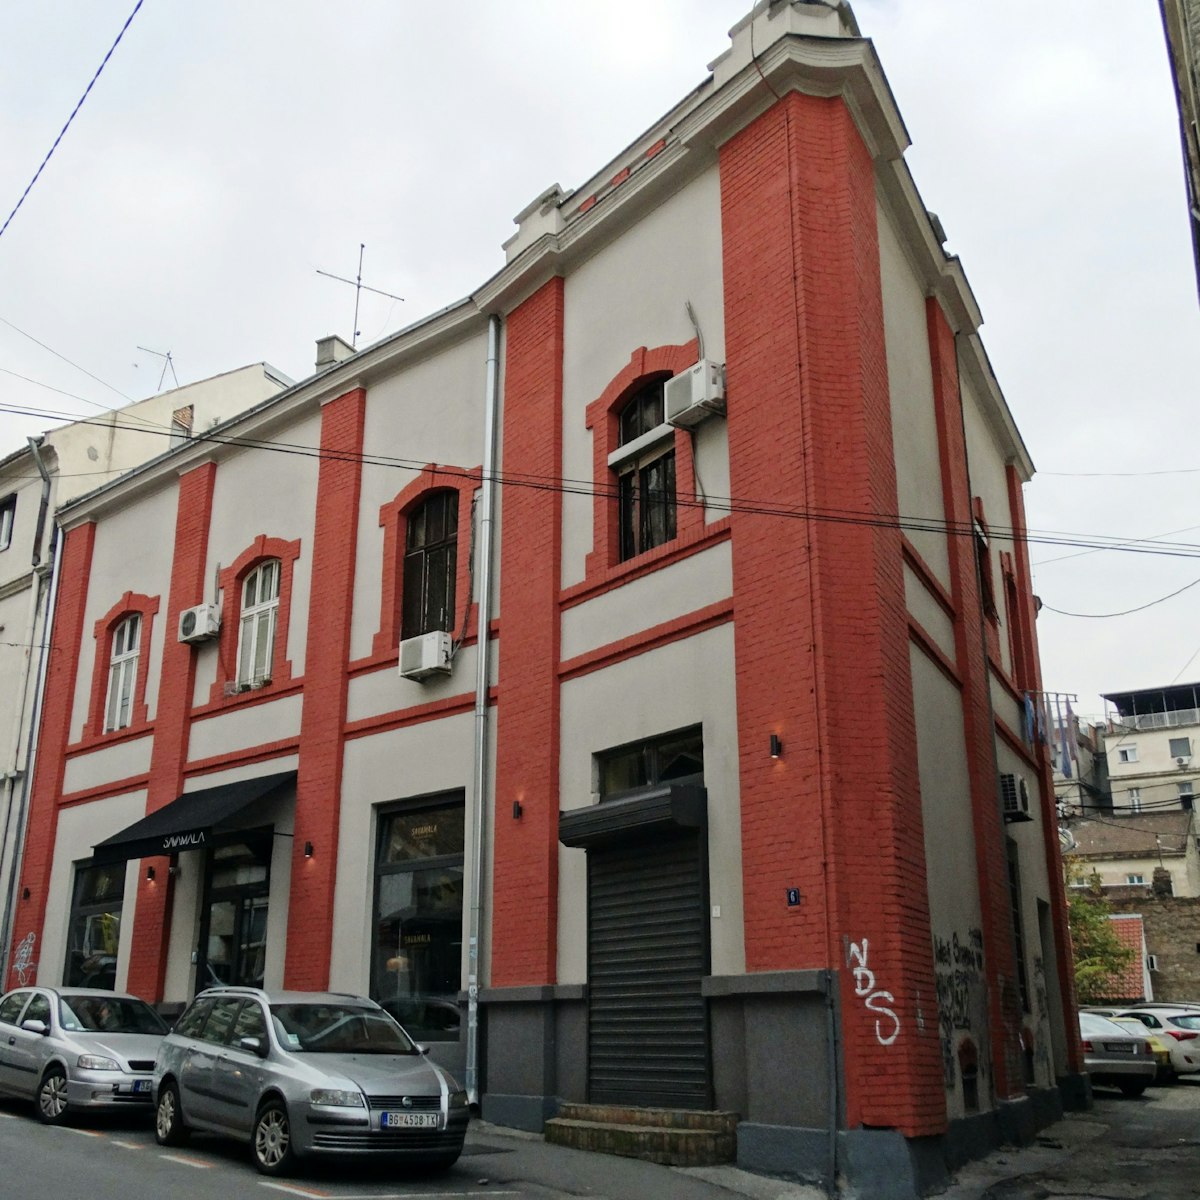 The early 1900s building of Savamala Bed & Breakfast